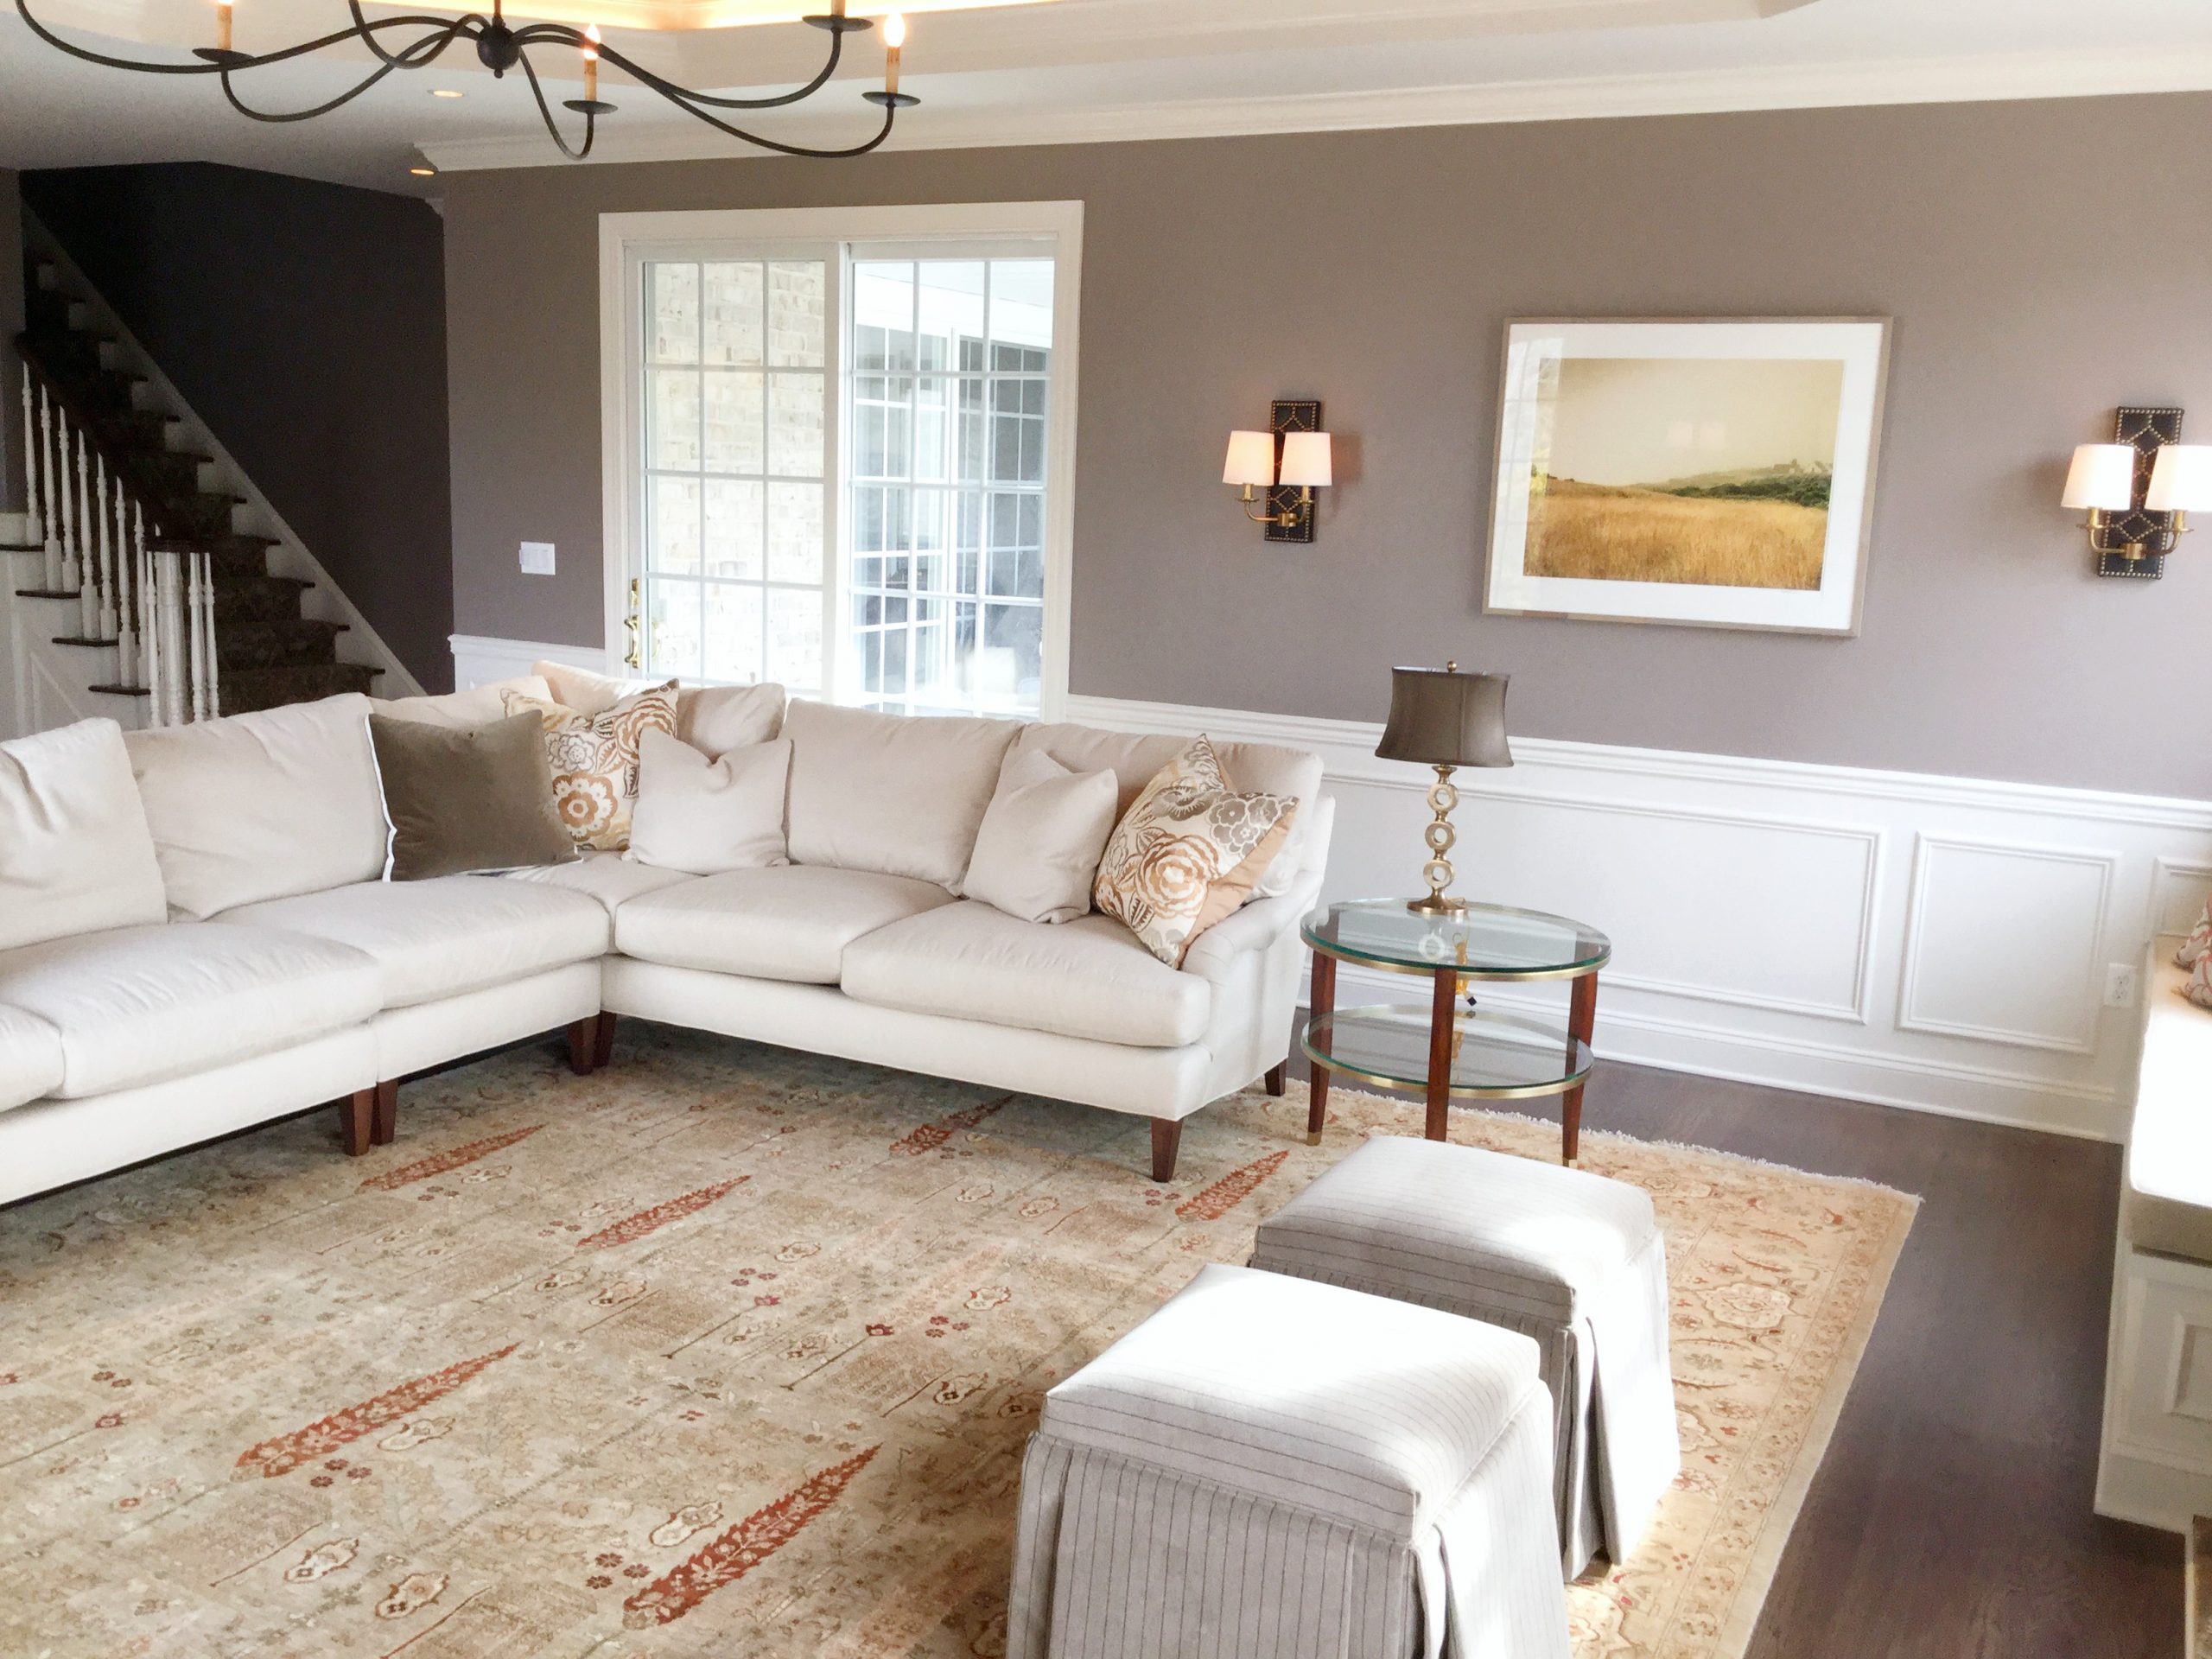 Transitional family room with dark hardwood flooring, patterned beige carpet, grey wall color, and minimal light beige furniture